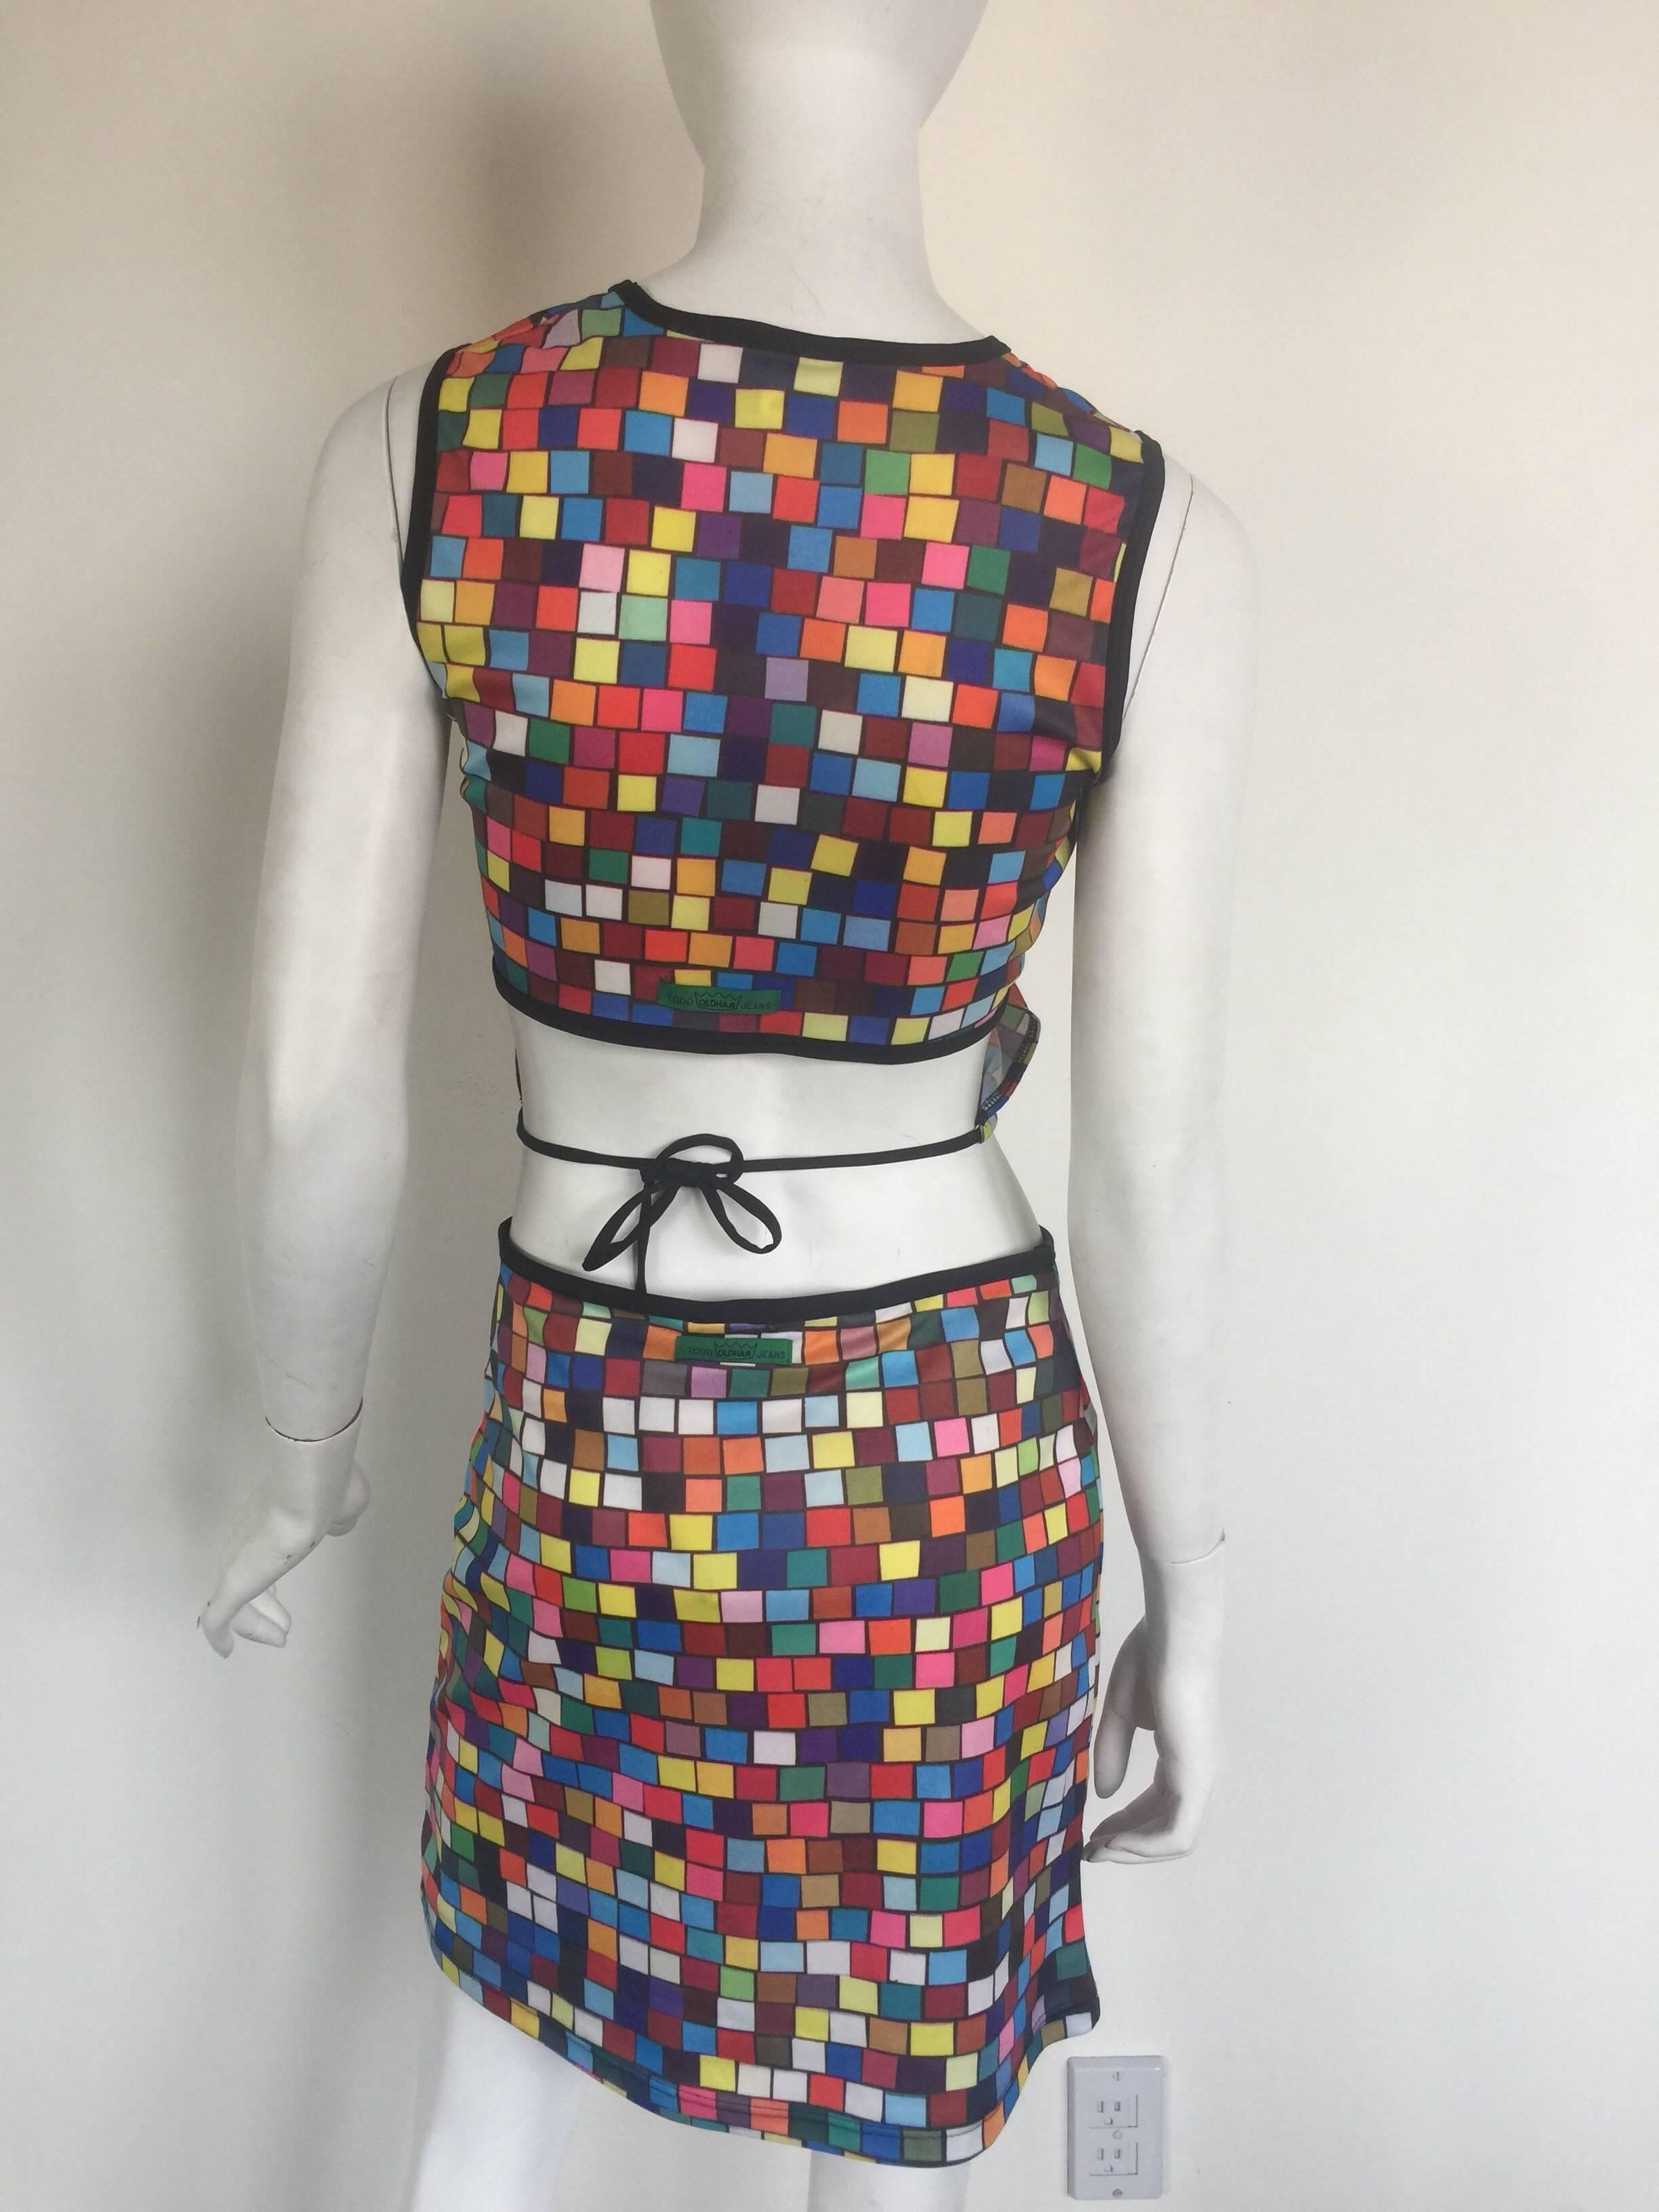 Gray Todd Oldham iconic rubik's cube geometric print skirt and crop top ensemble  For Sale